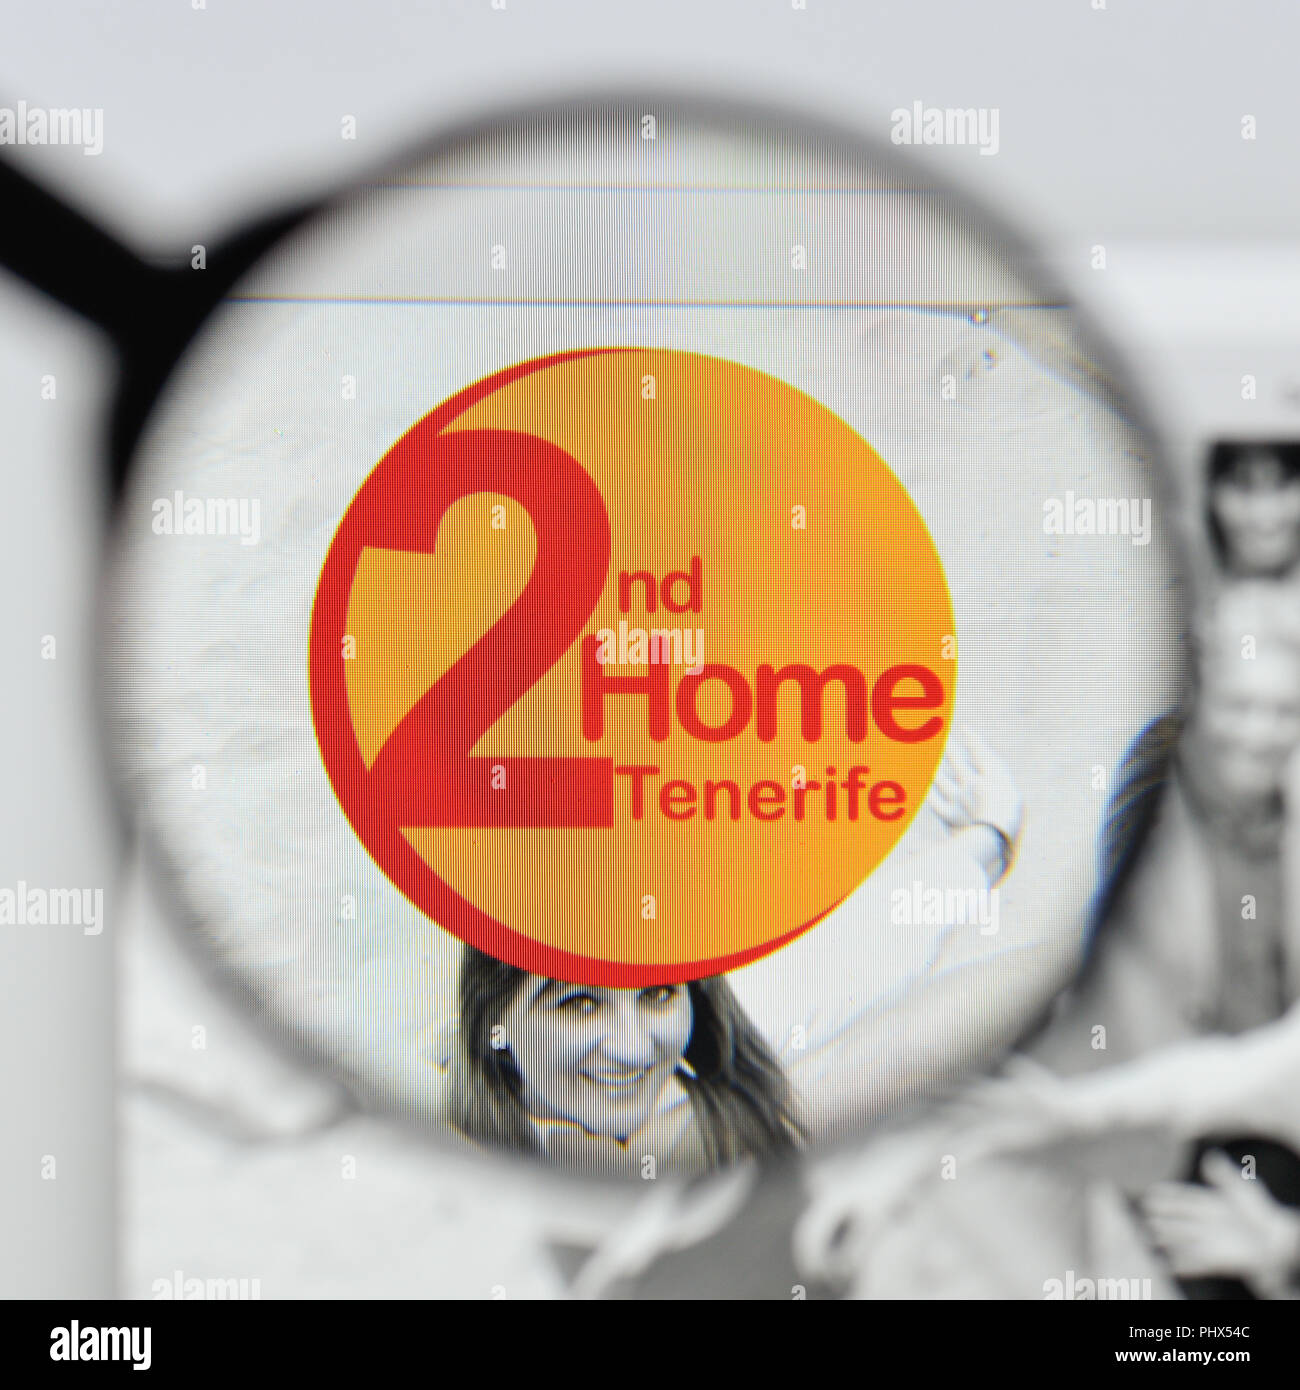 Milan, Italy - August 20, 2018: Rent 2nd home tenerife website homepage. Rent 2nd home tenerife logo visible. Stock Photo